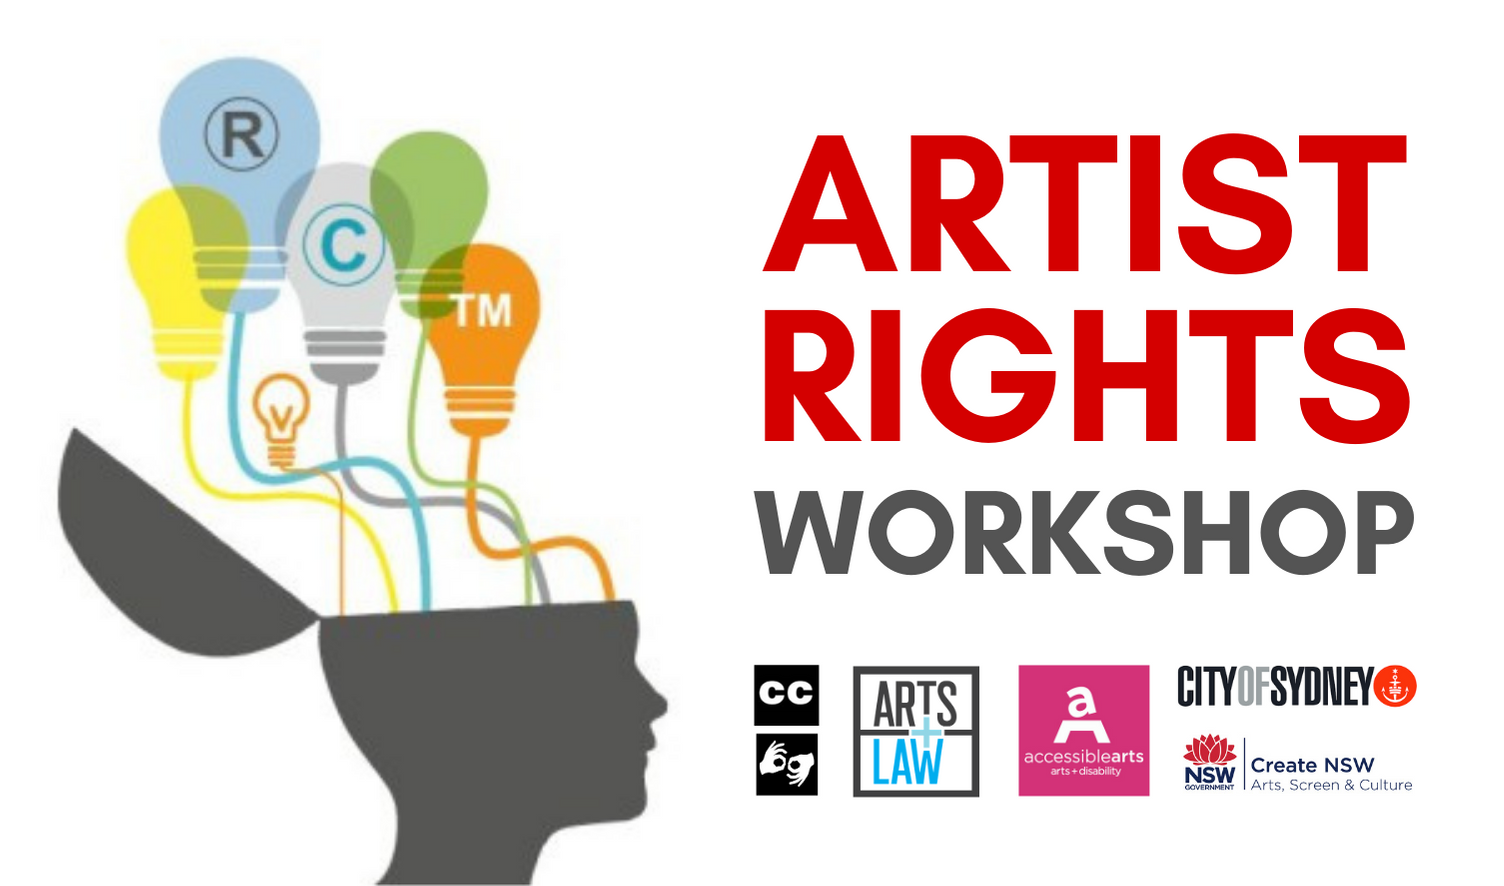 On the left is an illustration of a human head with different coloured light bulbs coming out of it. On the right are the words ARTIST RIGHTS WORKSHOP and some logos.